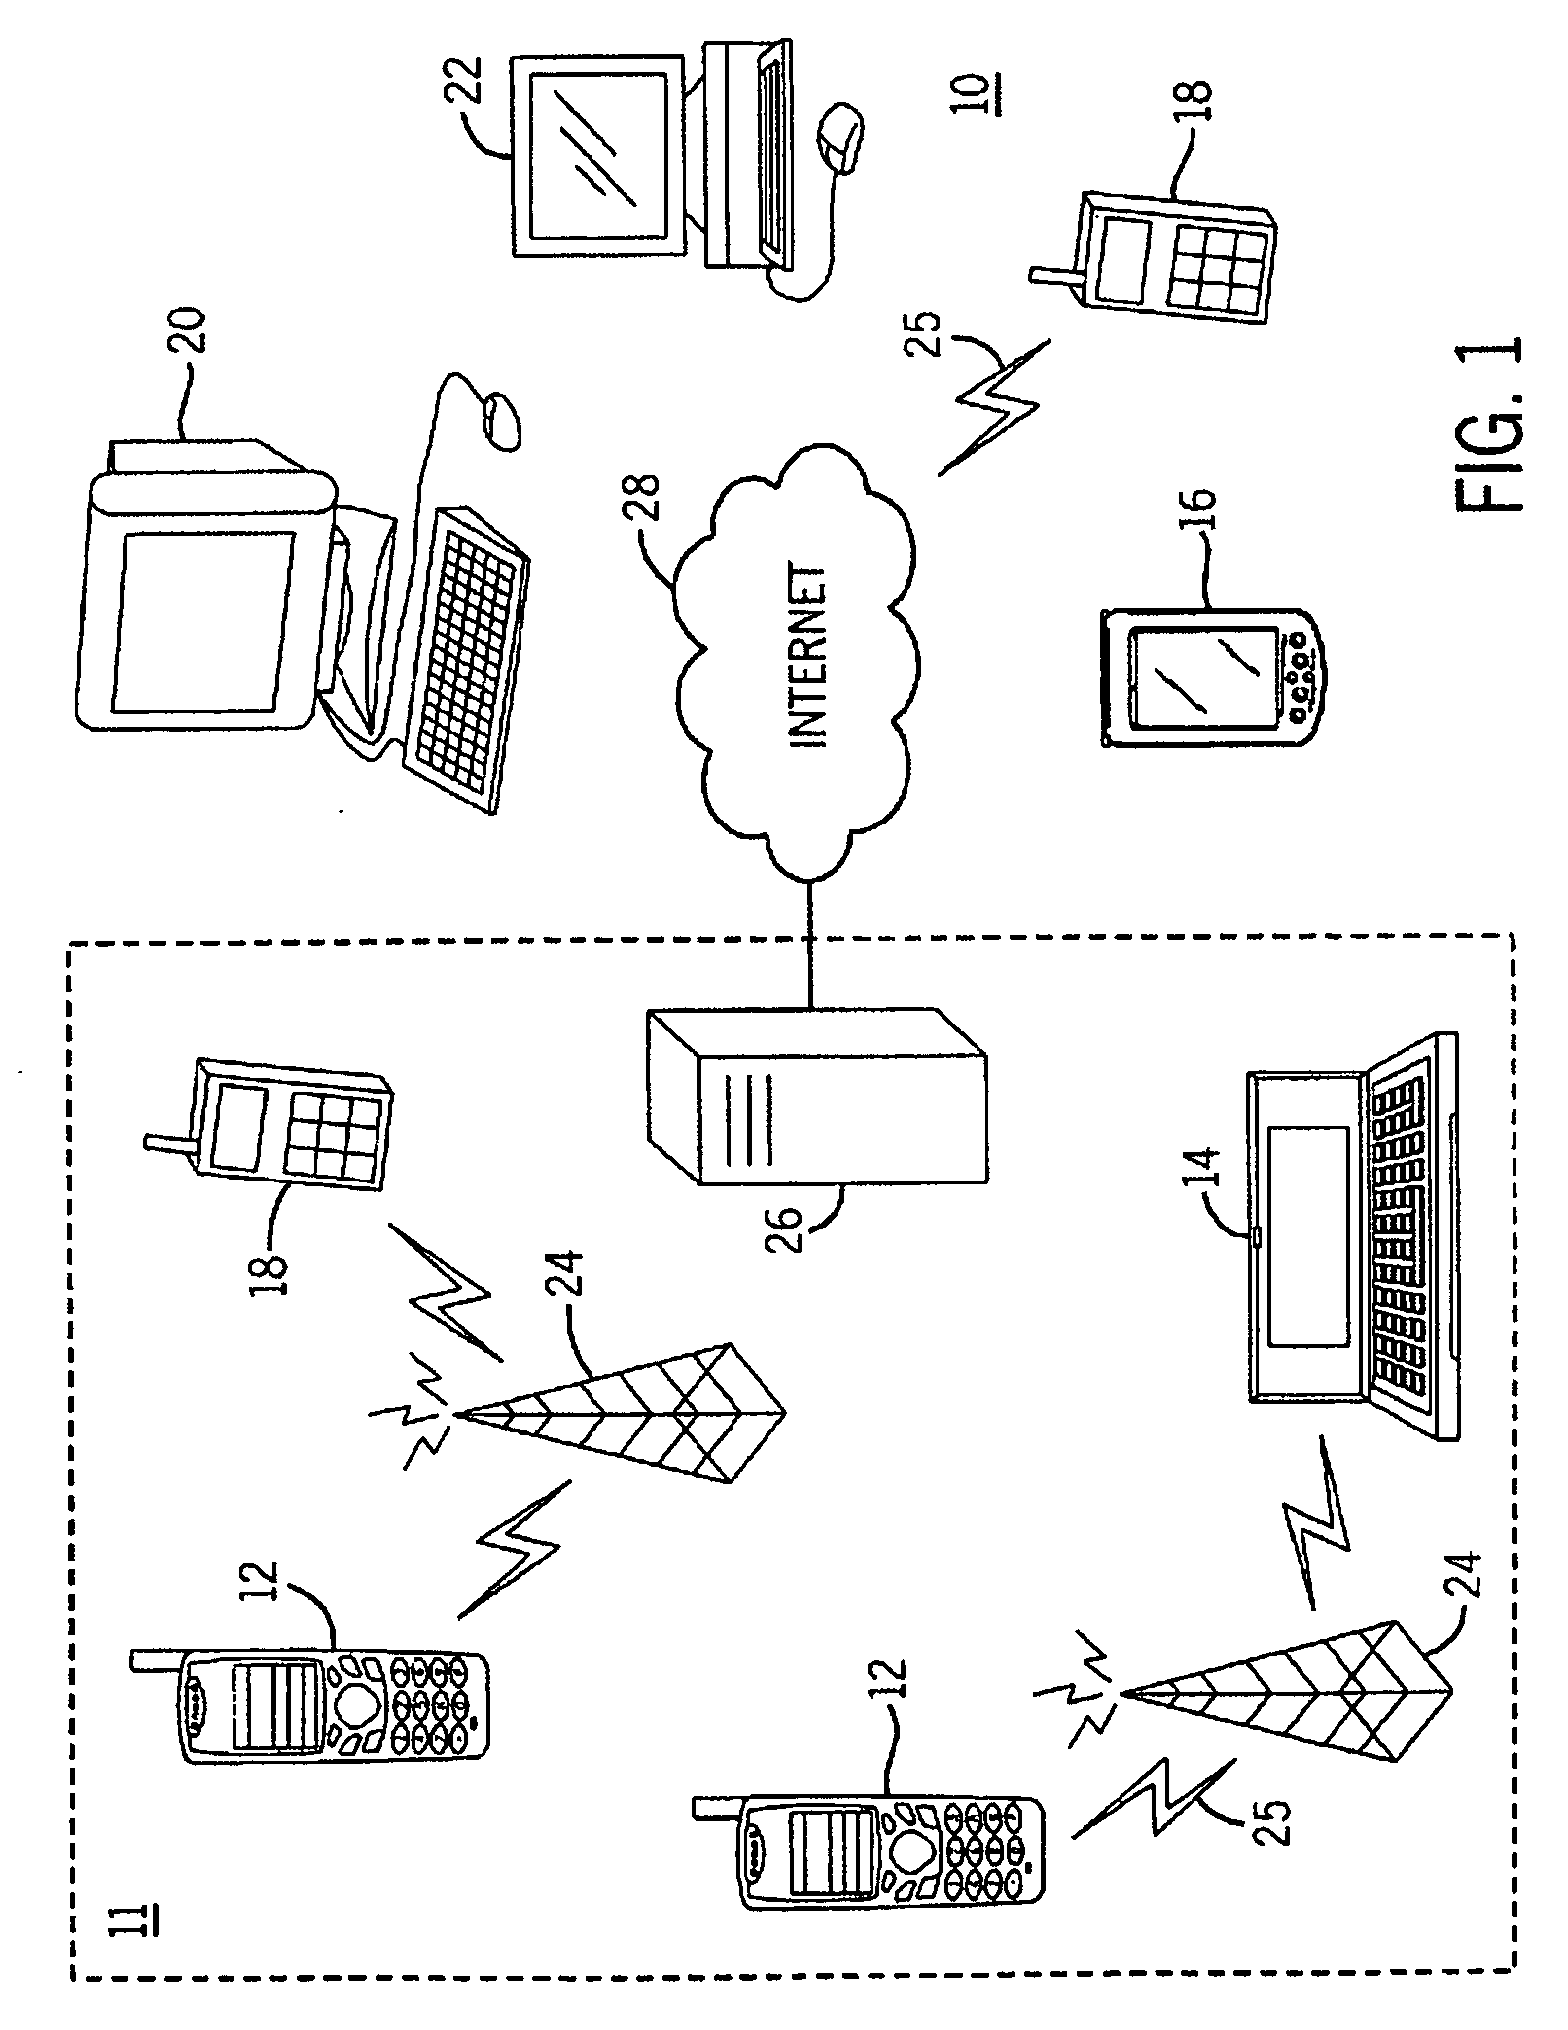 System and method for implementing reference-based electronic mail compression